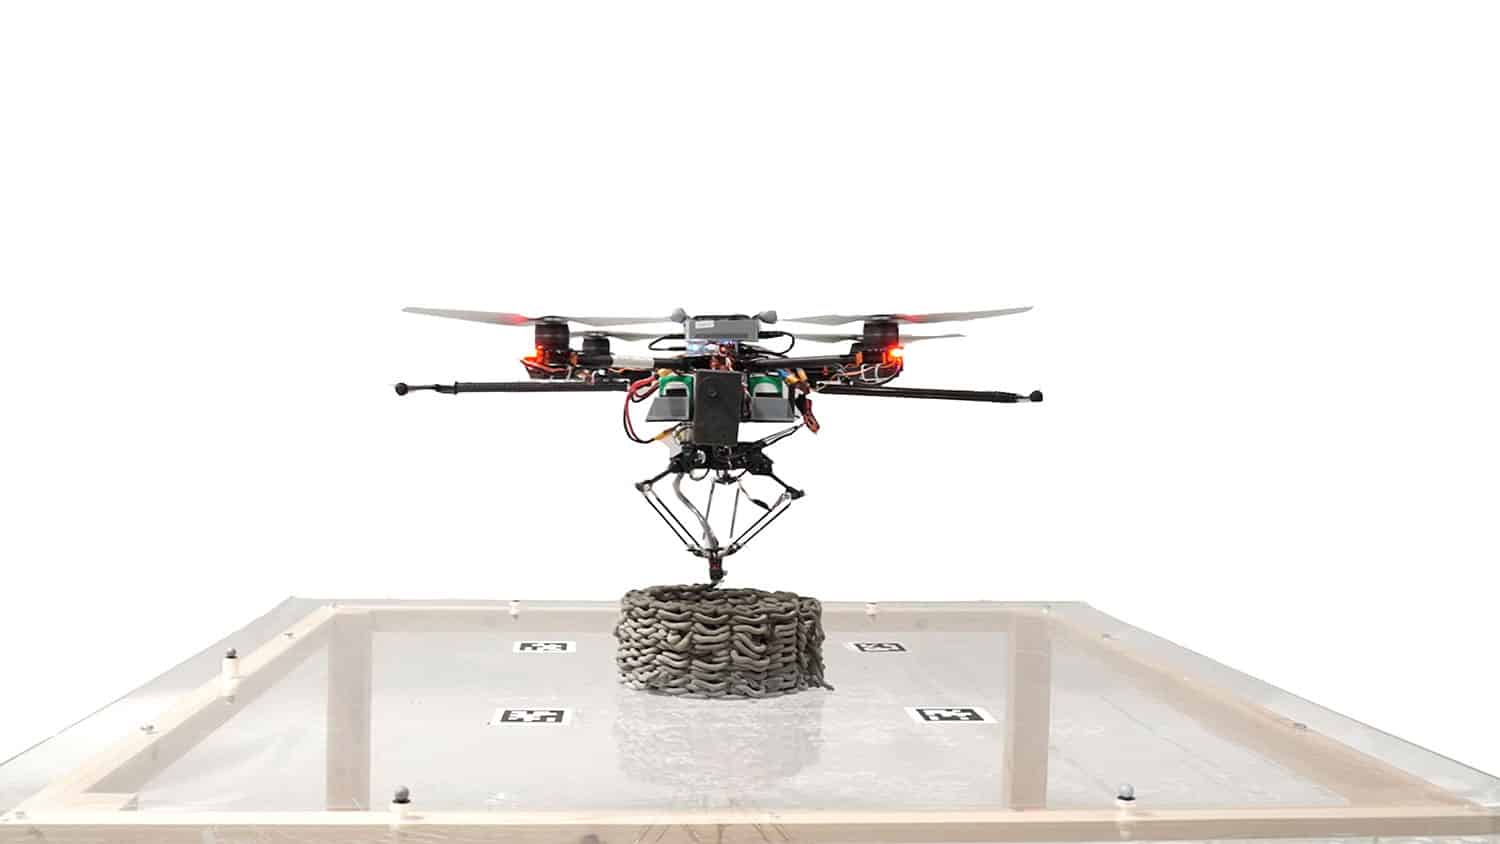 jury synge skræmmende A swarm of cooperative, 3D-printing drones for construction and repair